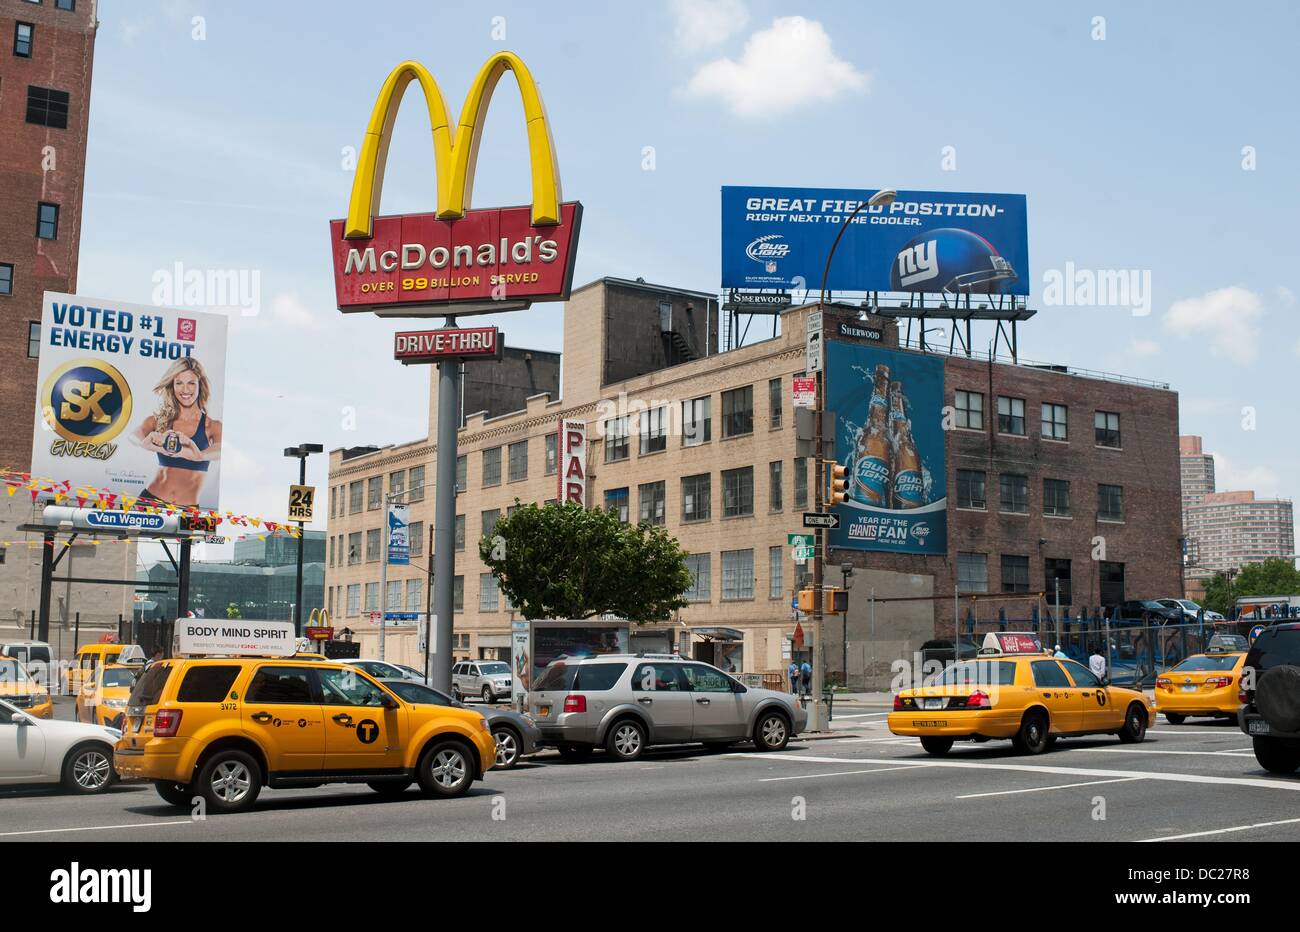 Brooklyn Woman Sues Macy's For Using Her Photo In Midtown Ads